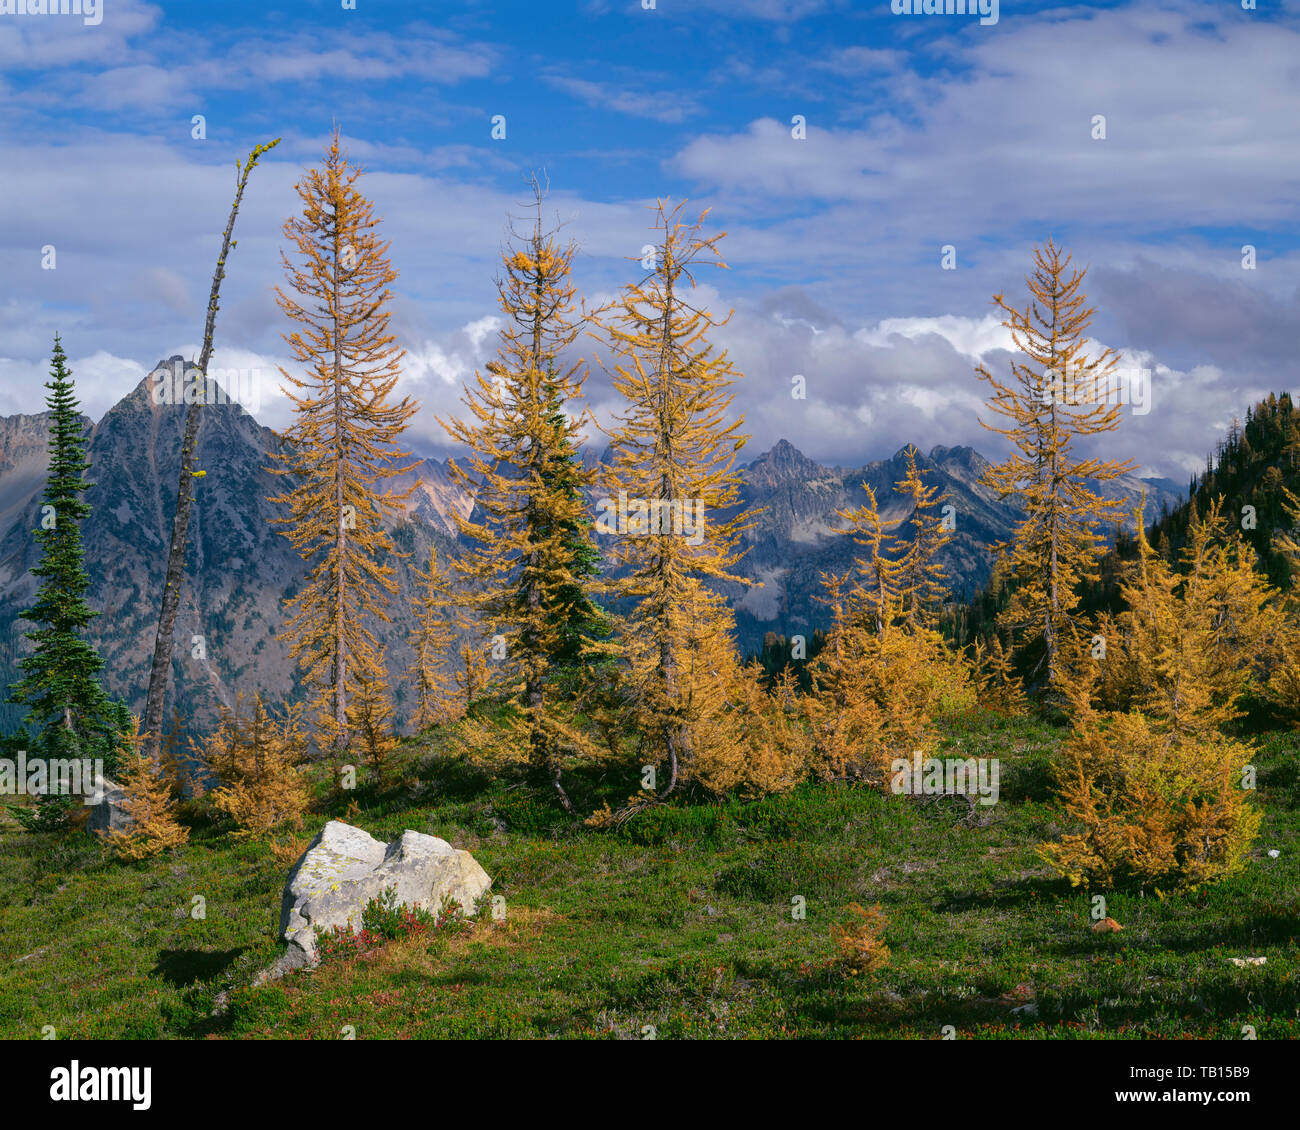 USA, Washington, Okanogan-Wenatchee National Forest, Fall-colored alpine larch frame peaks of the north-central Cascades, from near Maple Pass. Stock Photo